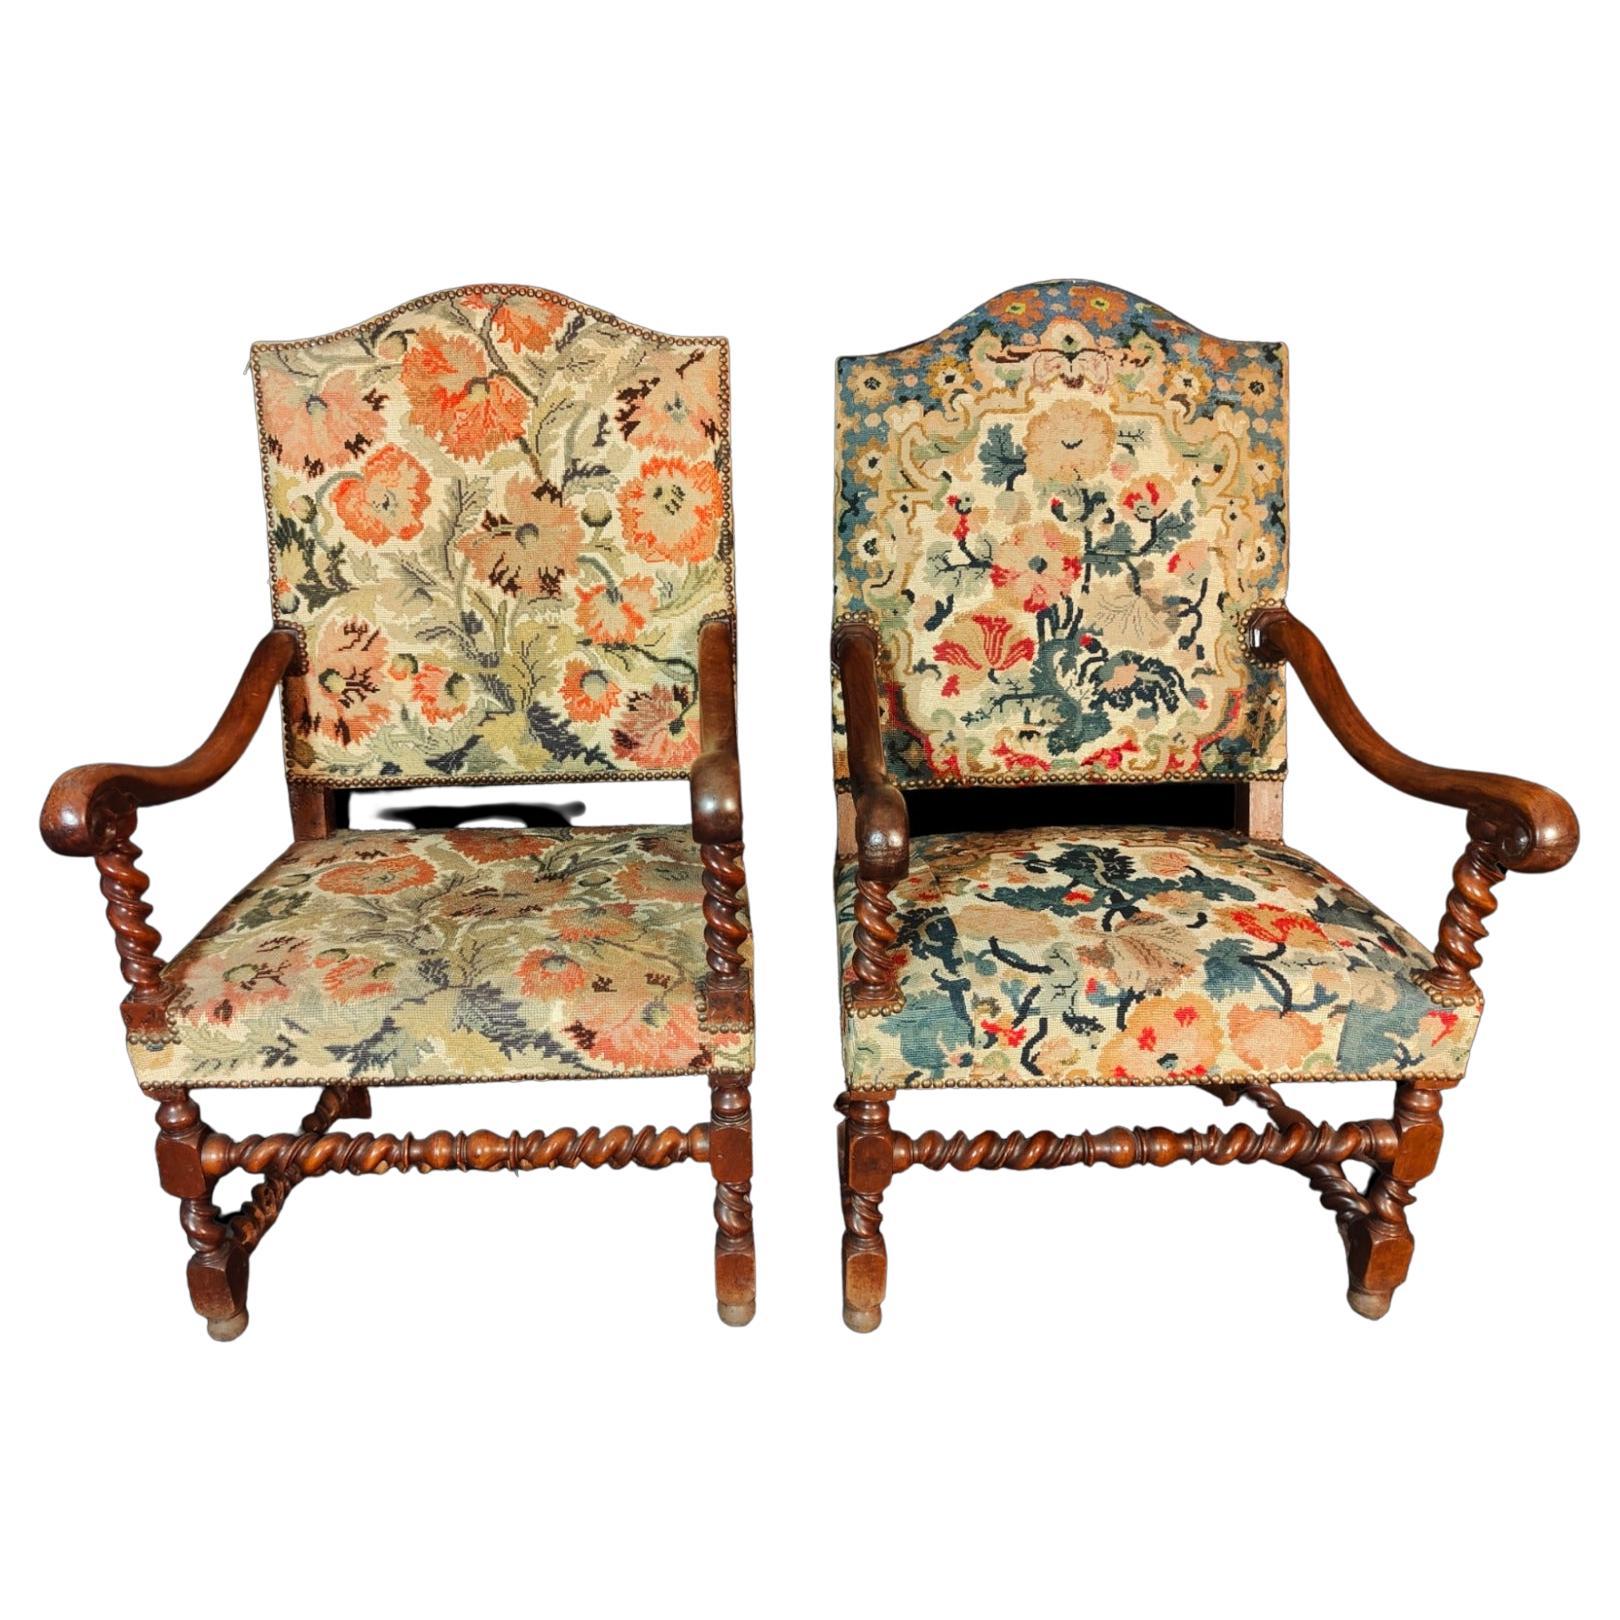 Pair Of Large Armchairs 19th Century